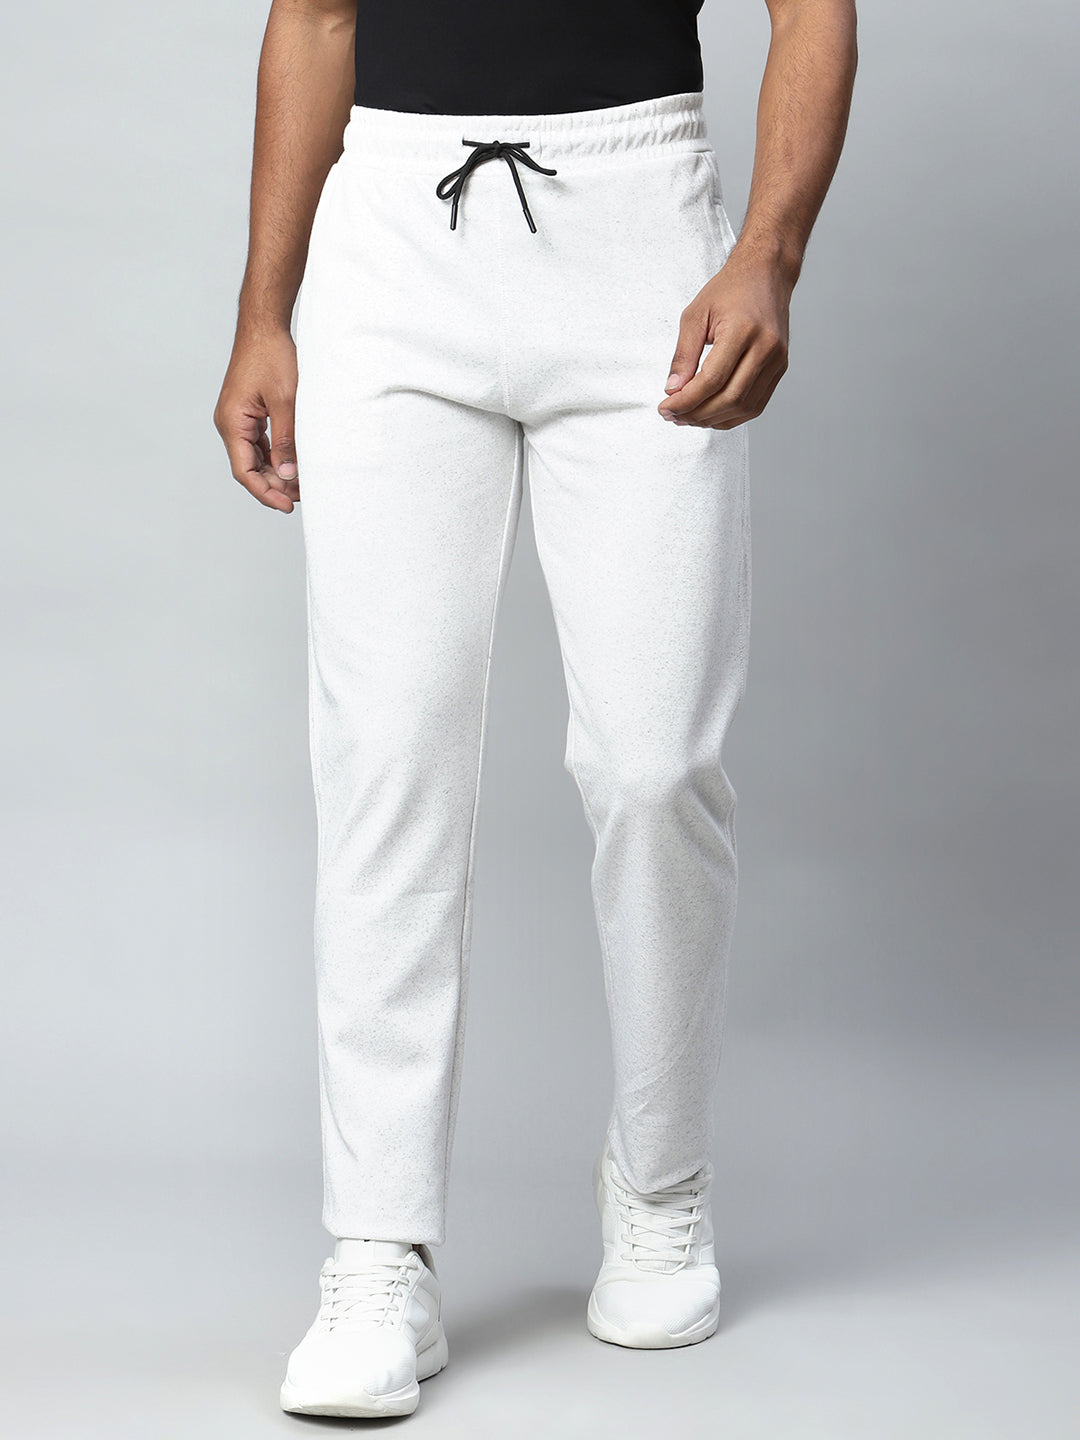 Men White Ankle Length Casual Lower